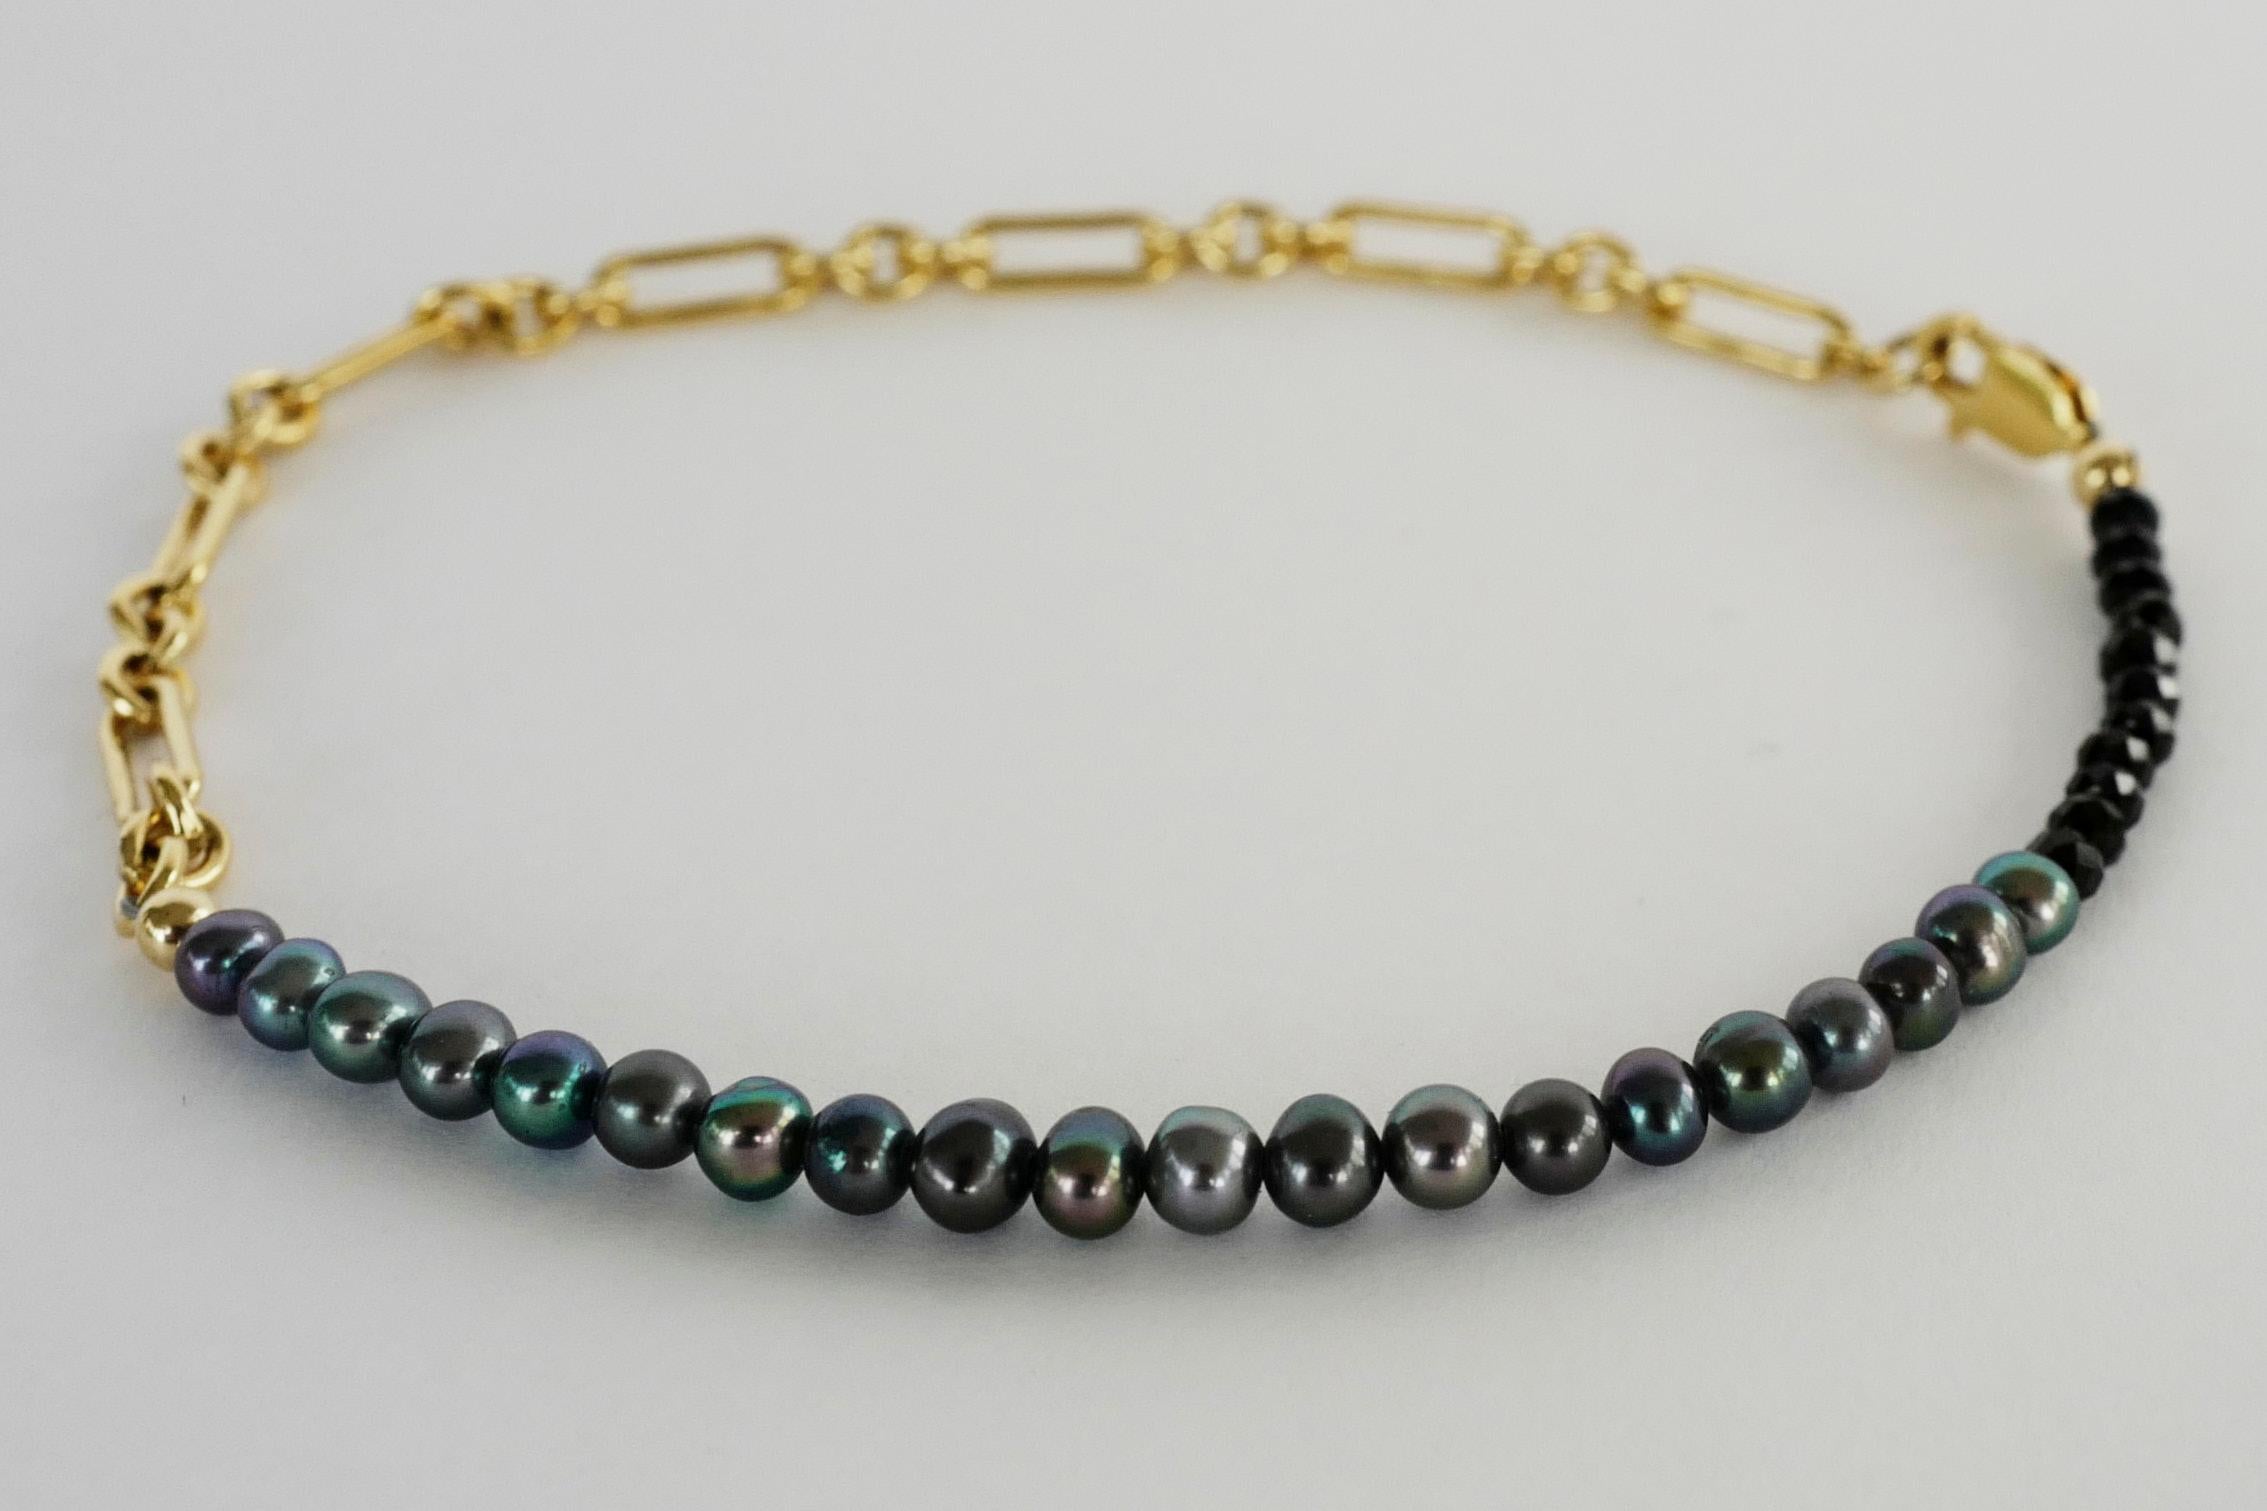 Round Cut Ankle Bracelet Beaded Black Pearl Spinel Gold Filled Chain J Dauphin